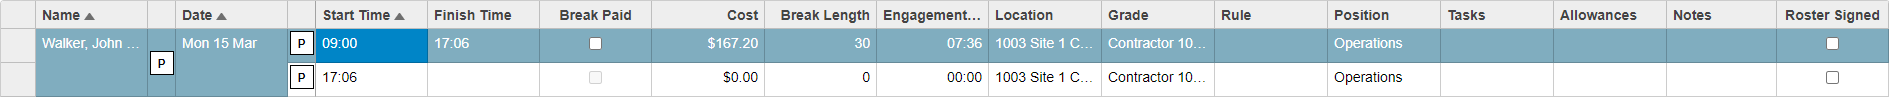 Figure #32: Merged Shift (2 x Engagements, 1 x Shift for one day)